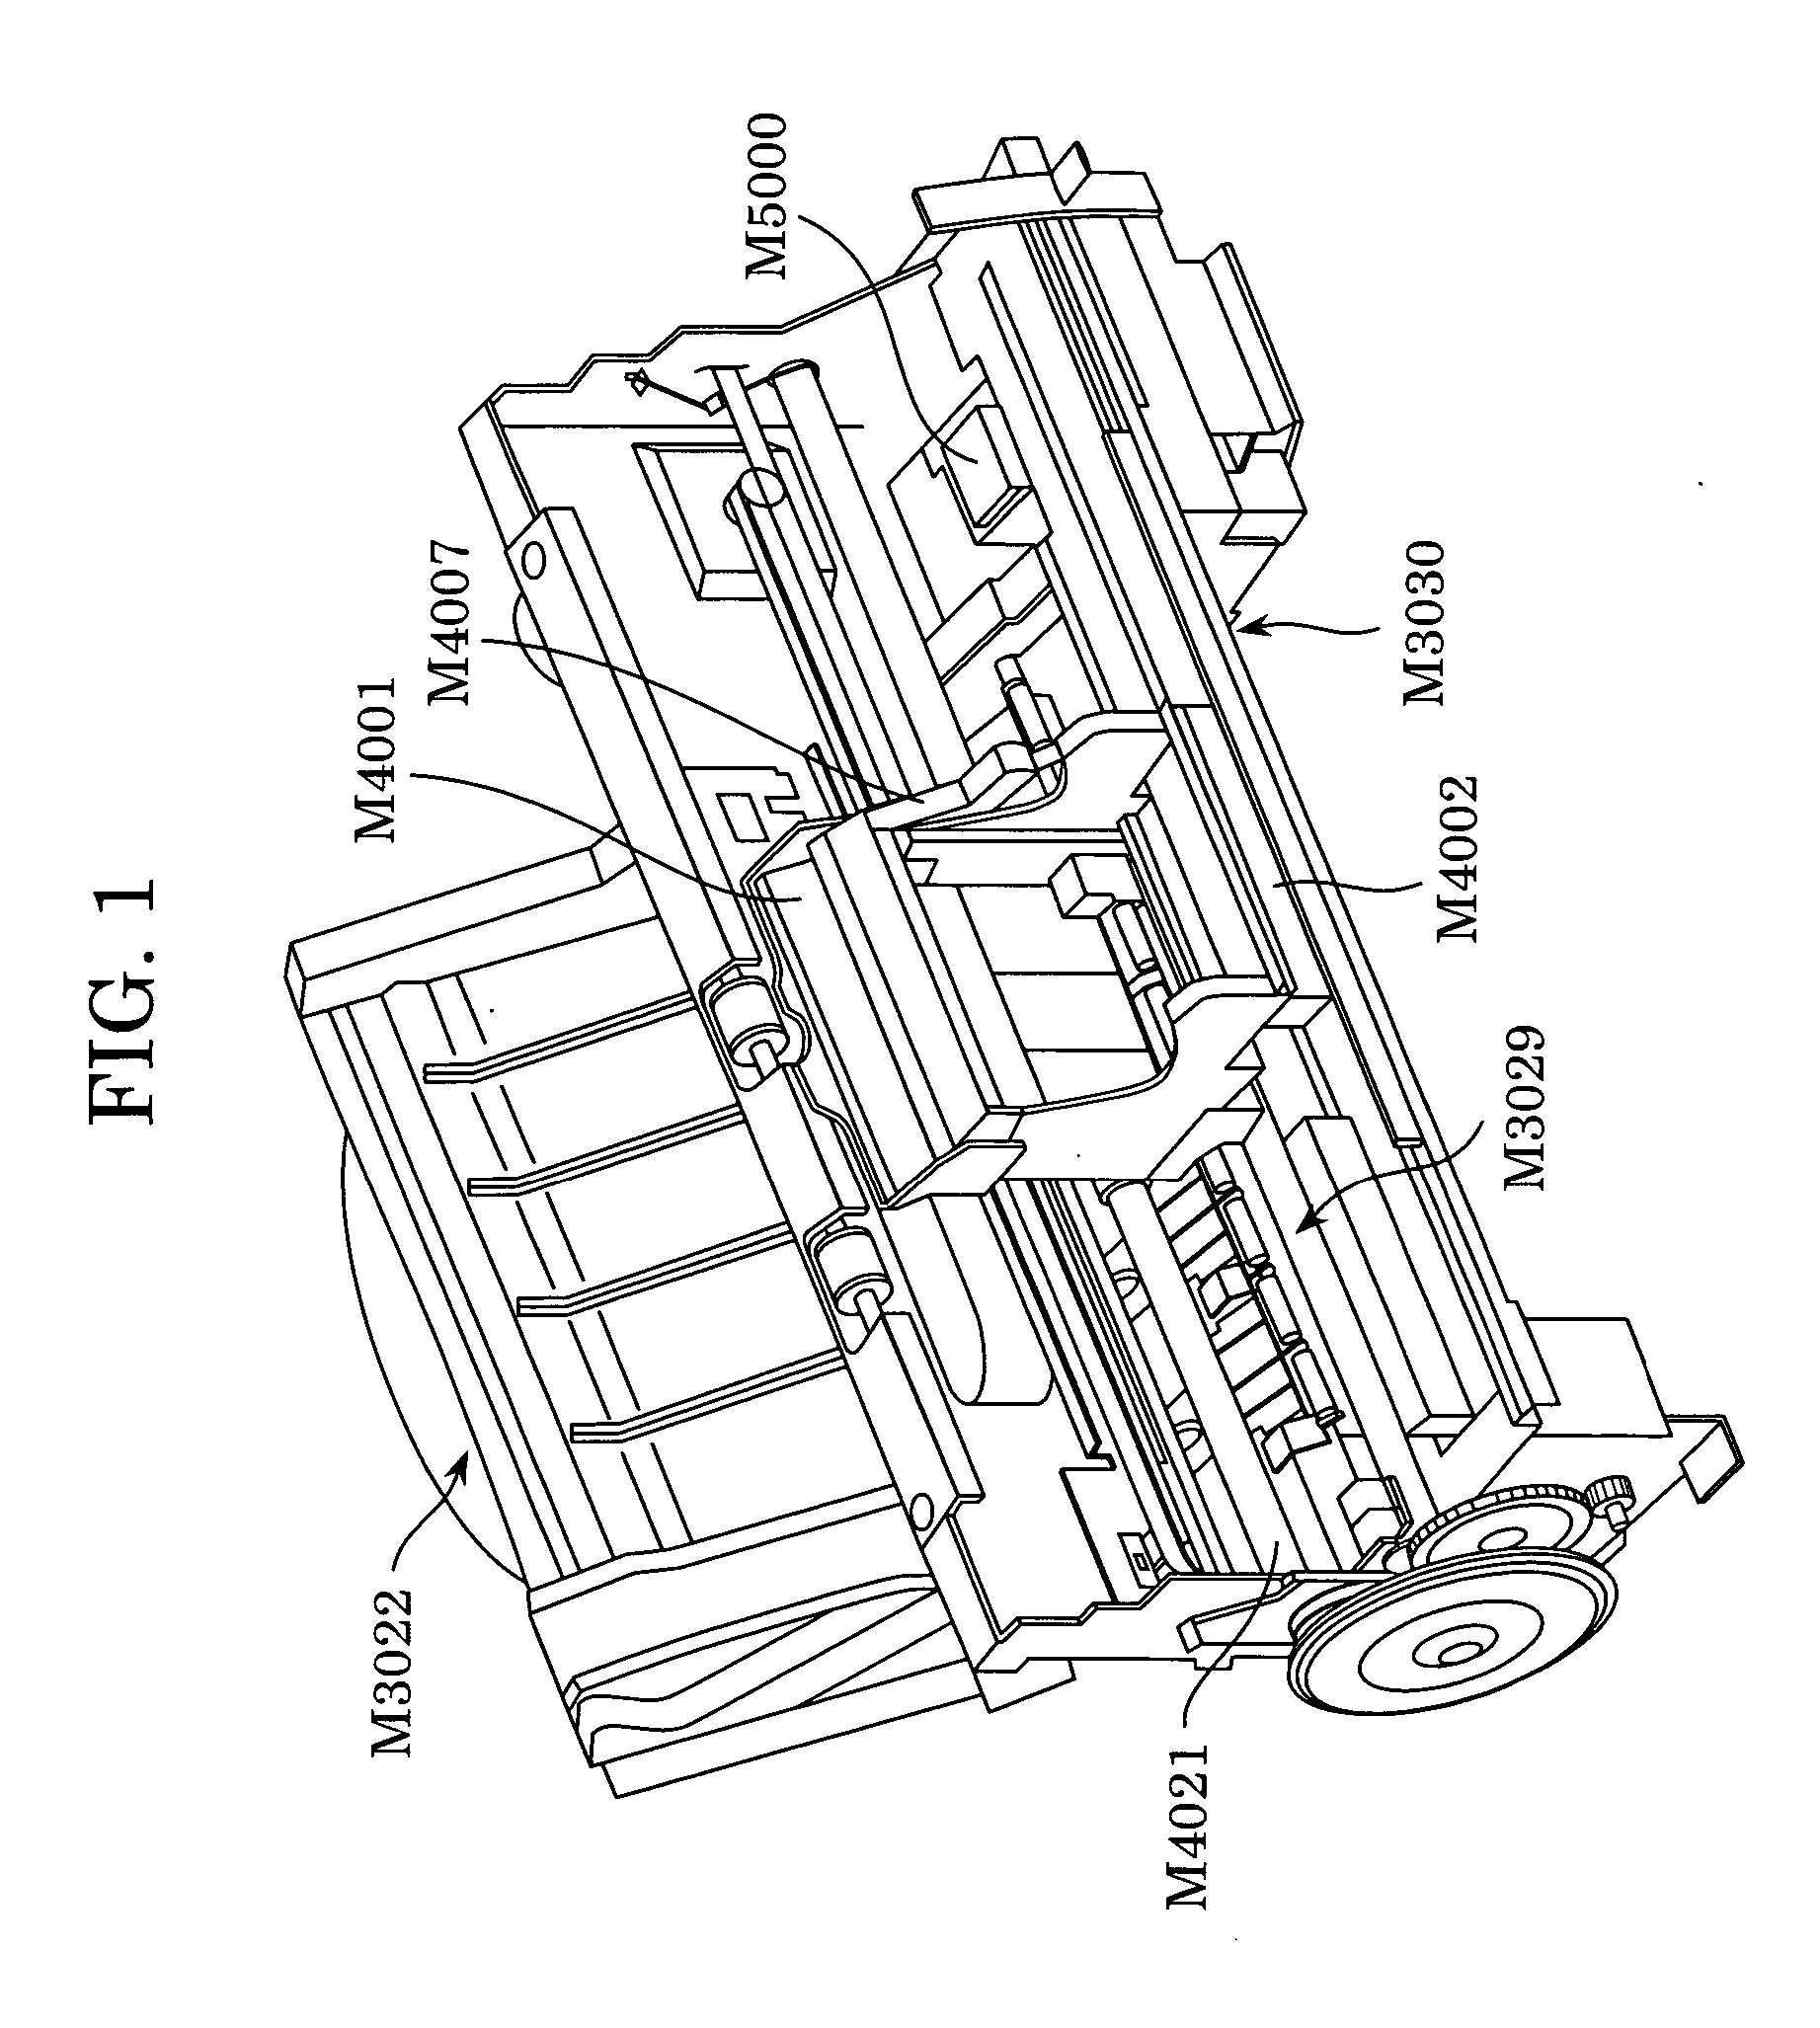 Ink jet head and ink jet printing apparatus having the head